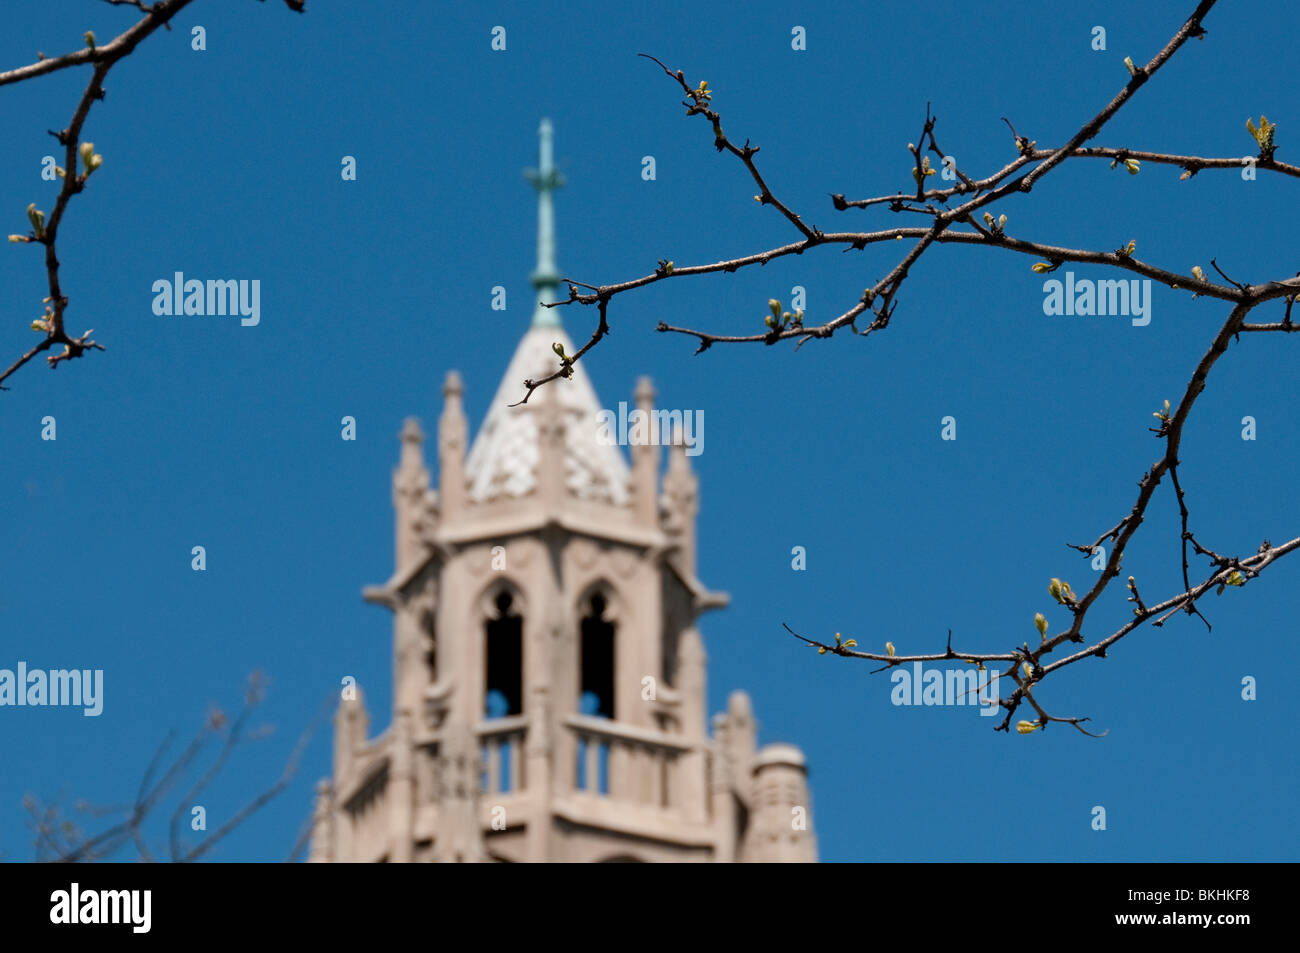 Church tower and budding branches. Stock Photo